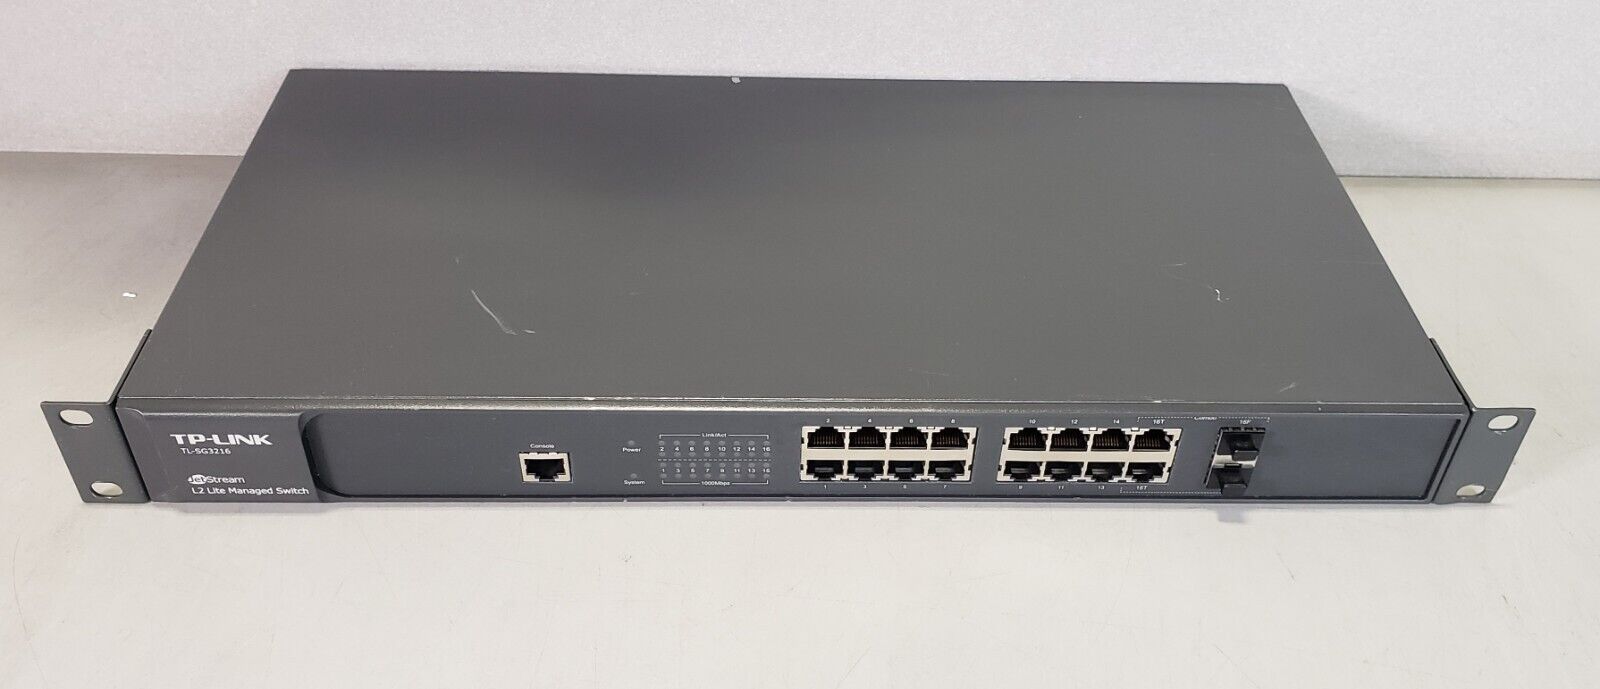 Tp-link TL-SG3216 Jetstream L2 Managed switch